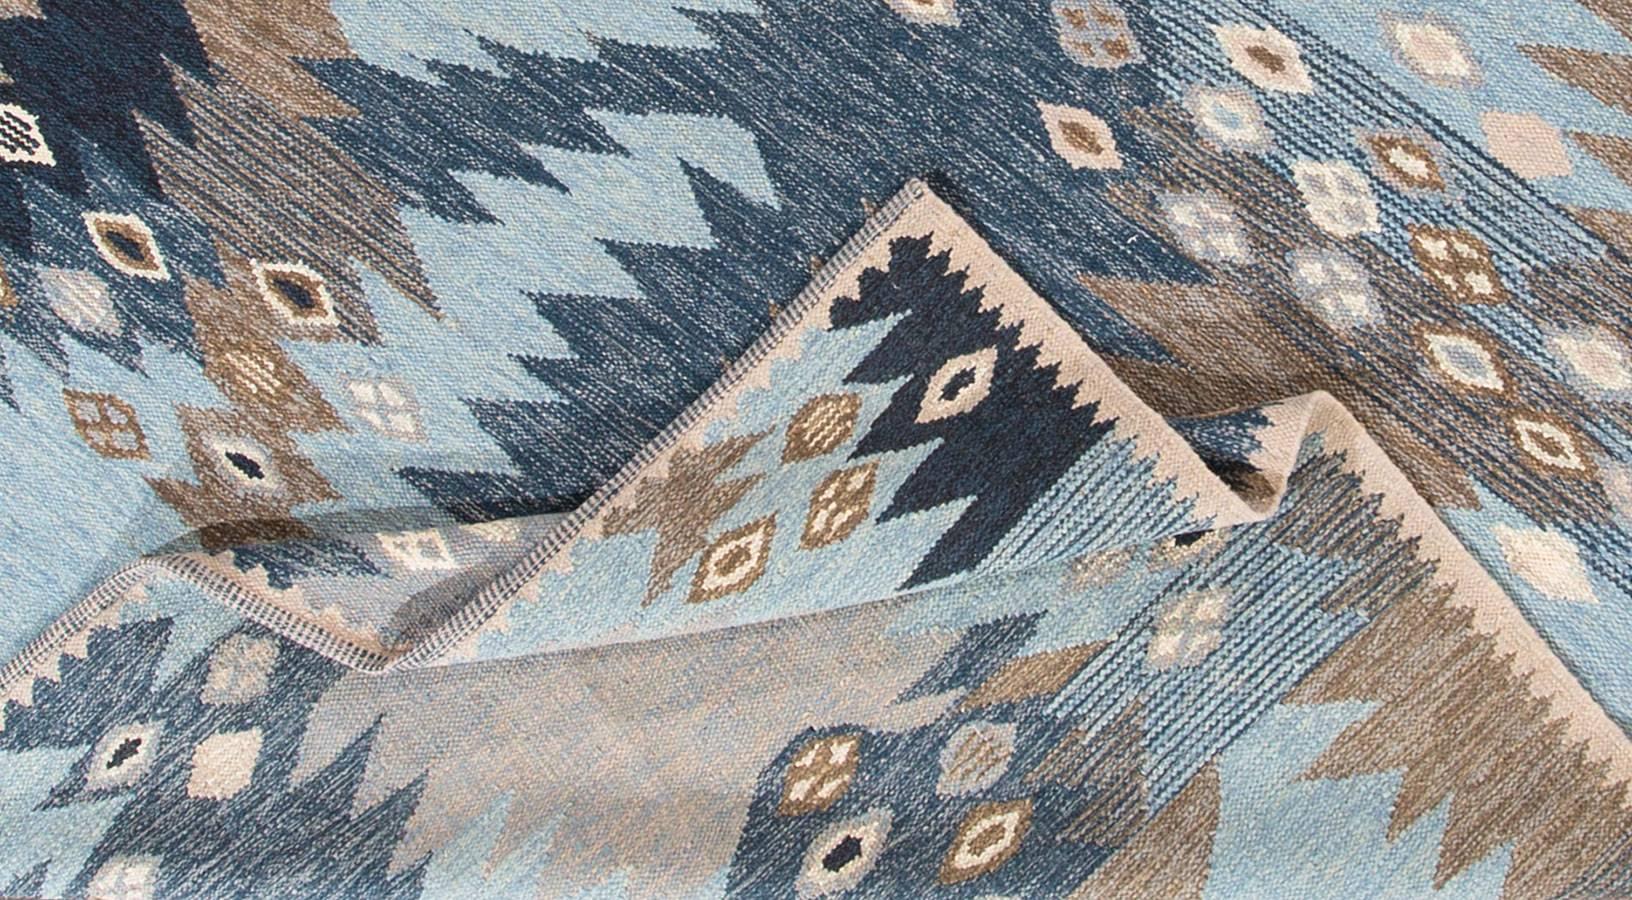 Contemporary Swedish  style rug with an abstract geometric design in blues, with gray and white accents. Measures 8.08x11.10.